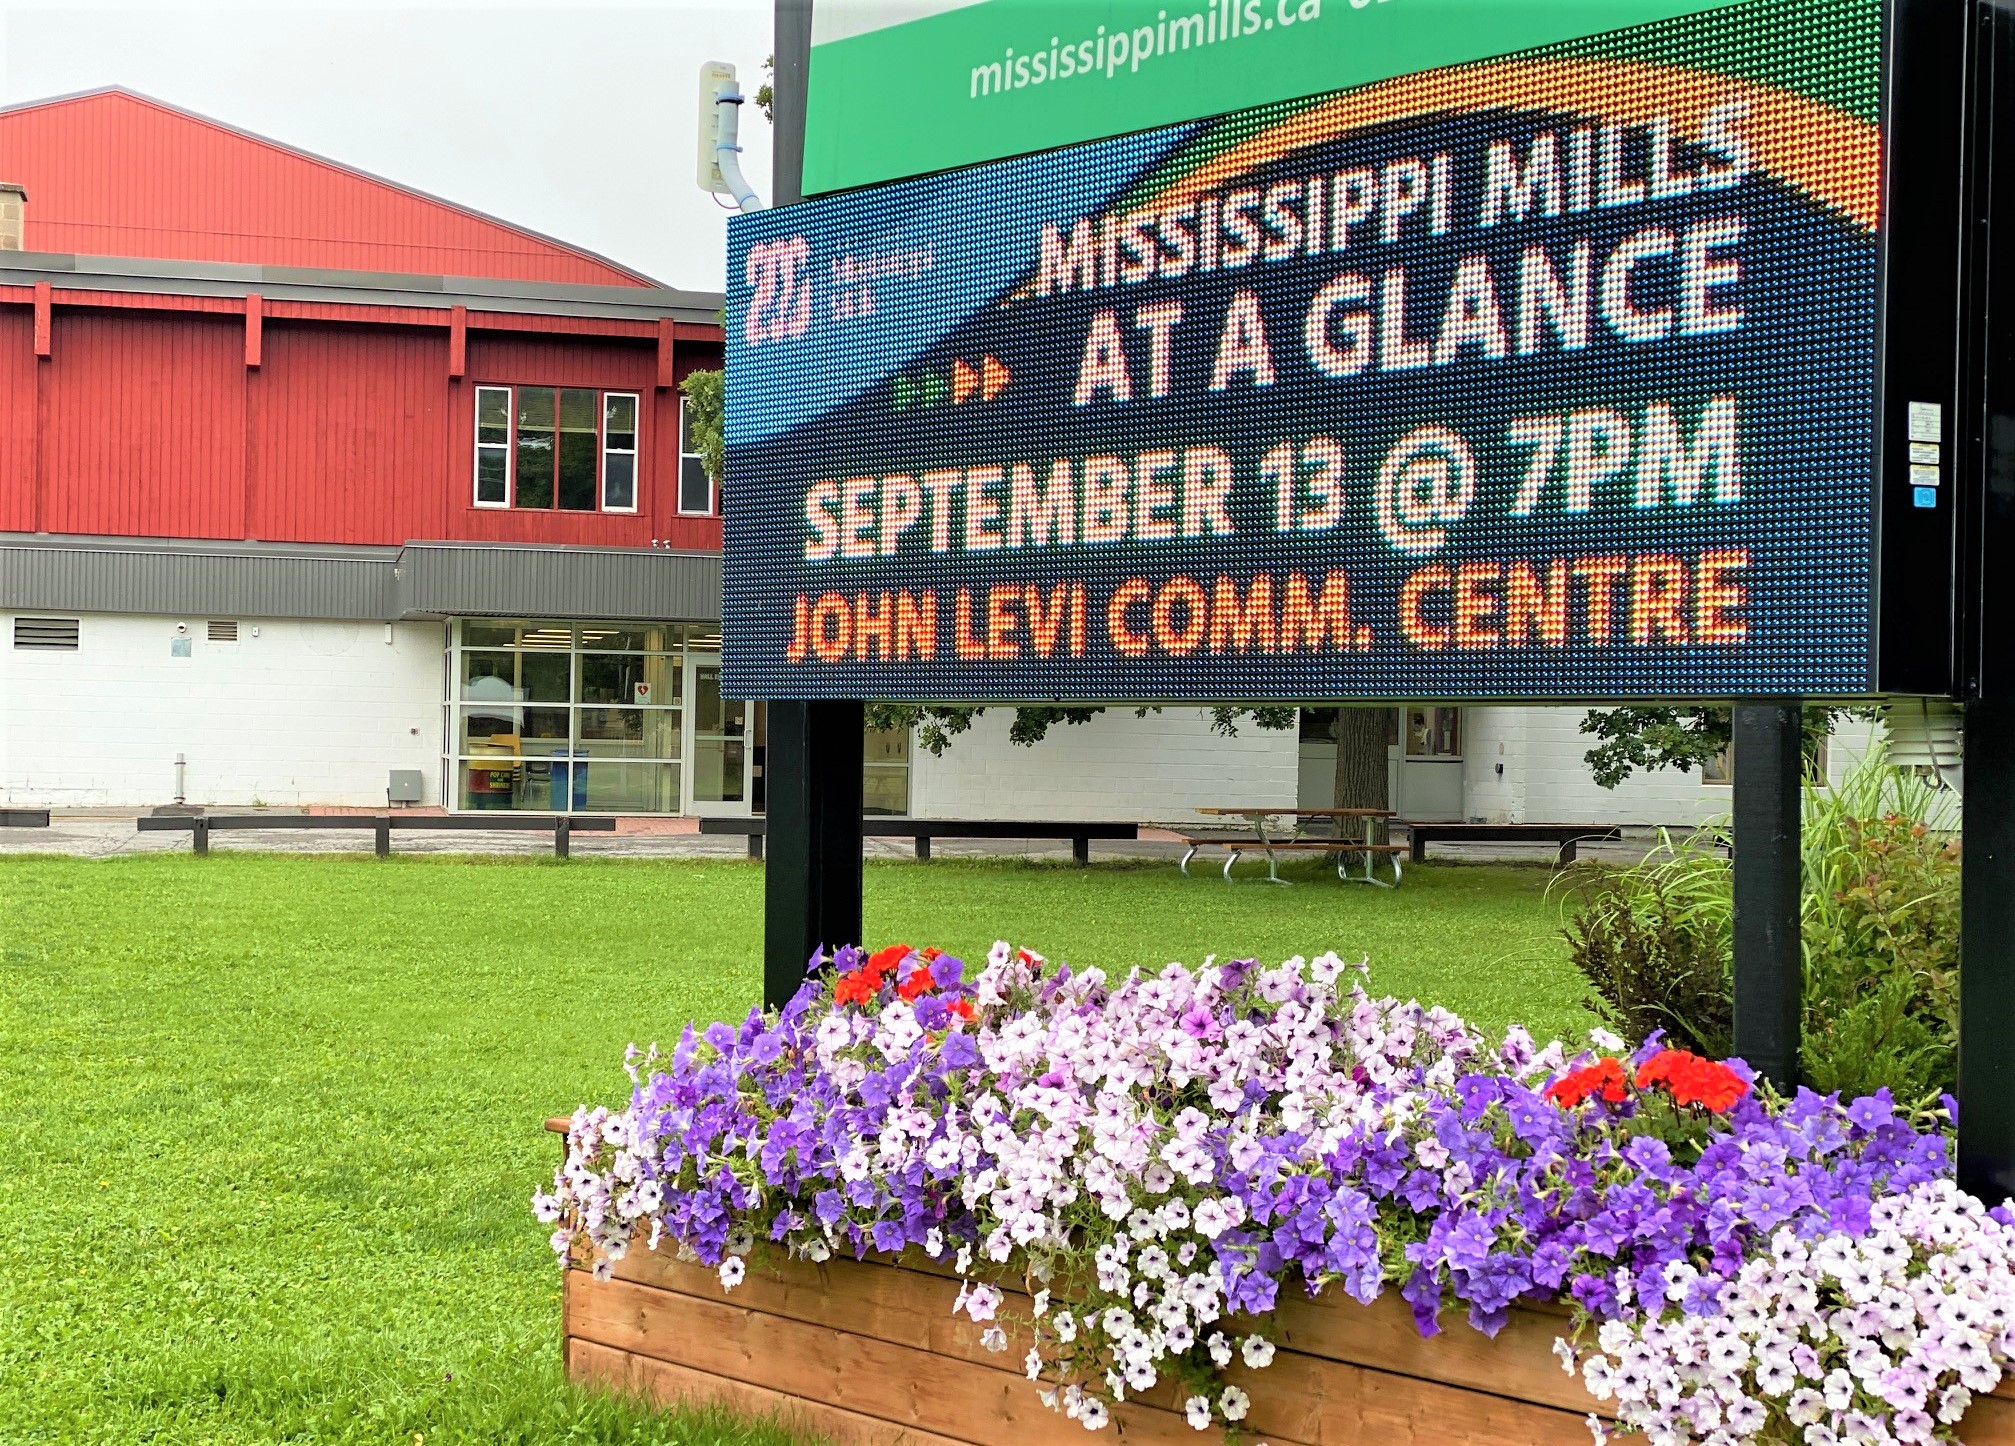 Digital sign reading 'Mississippi Mills at a Glance' in front of red and white building